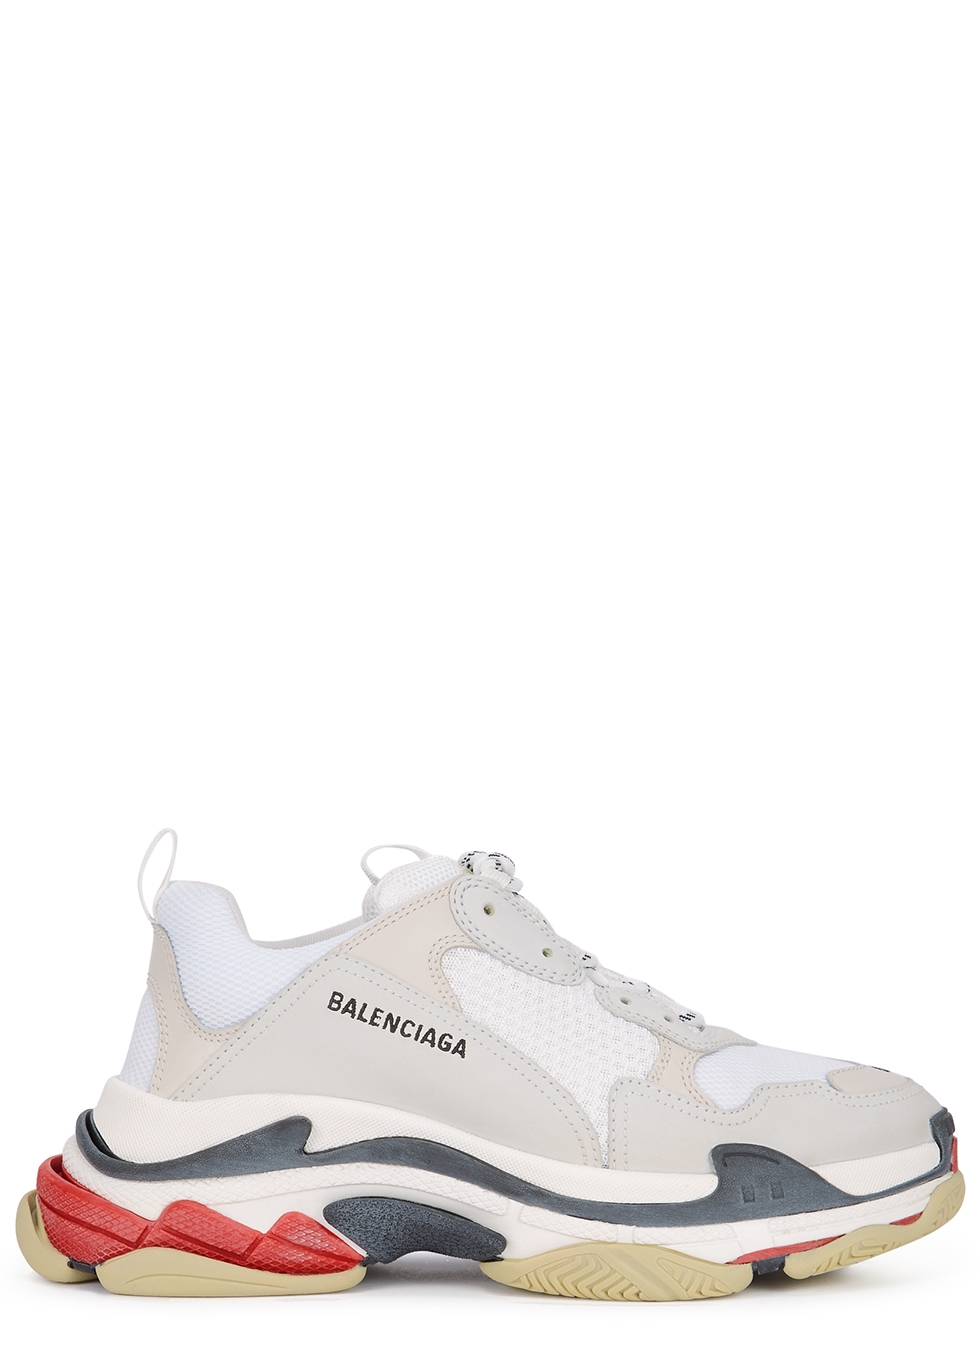 All The Balenciaga Triple S Split Colourway Low Top Trainers